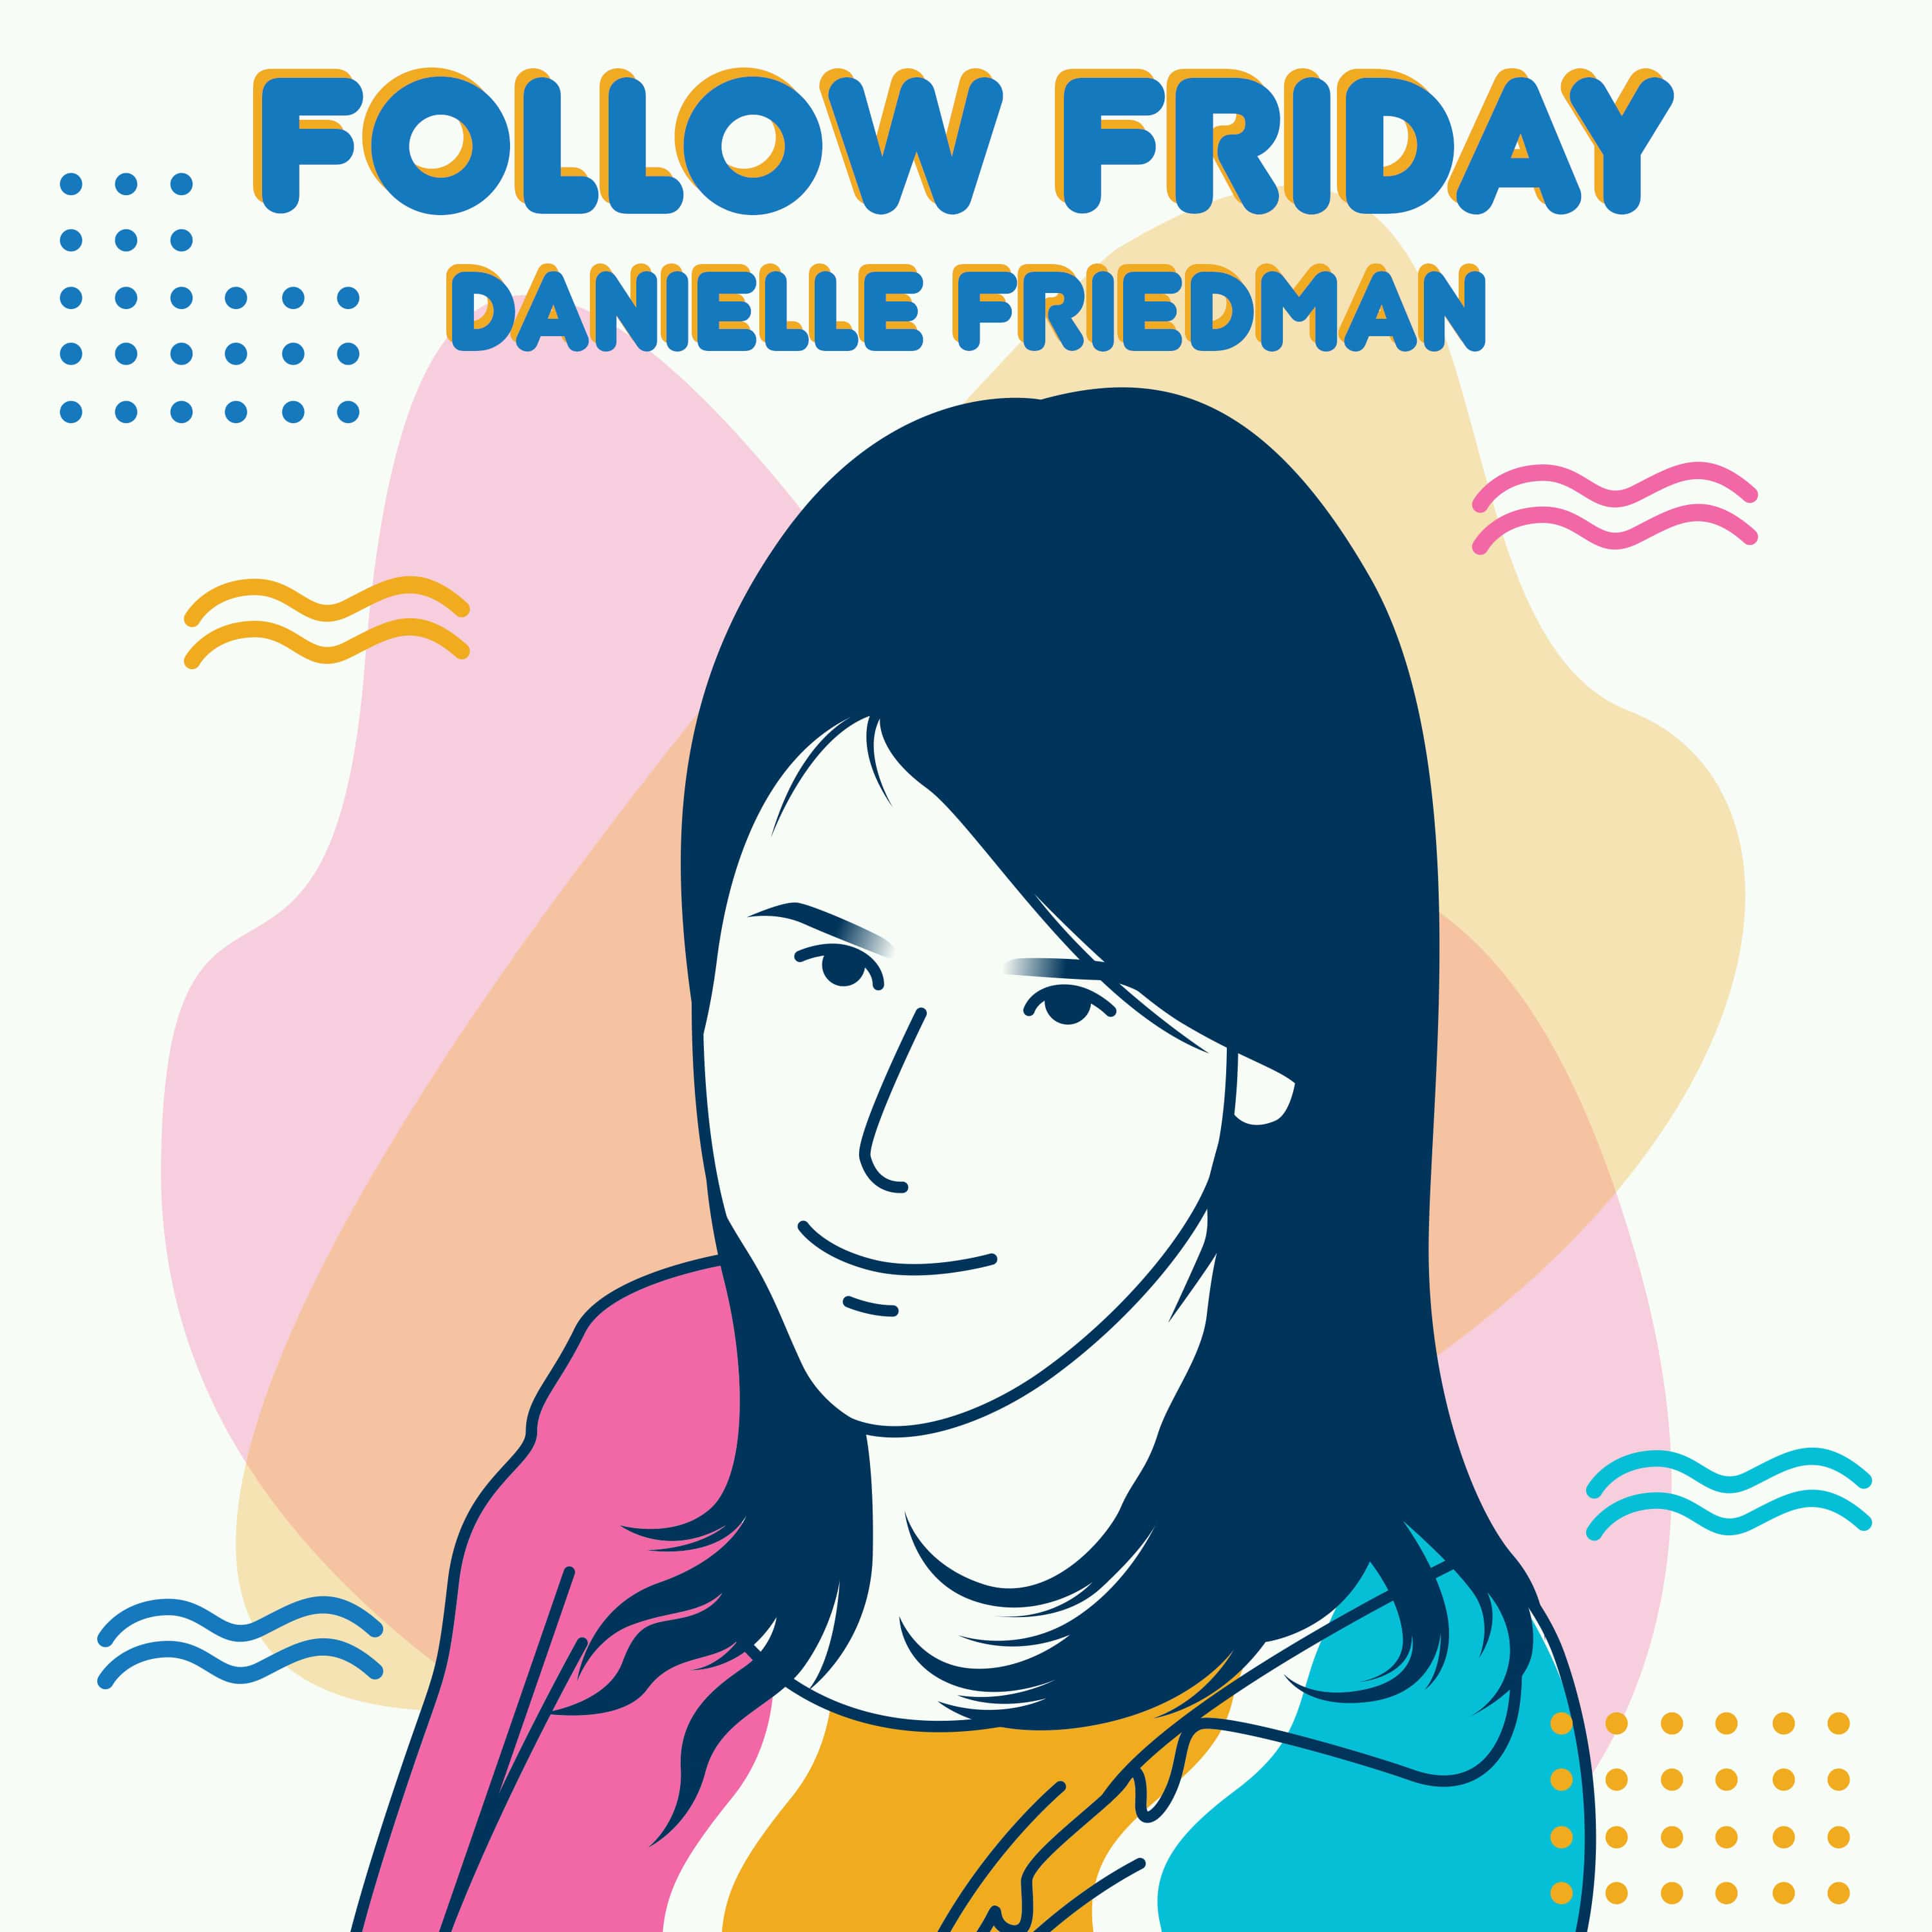 #59 Danielle Friedman (Let's Get Physical): Cooking in the nude, human footballs, no filters